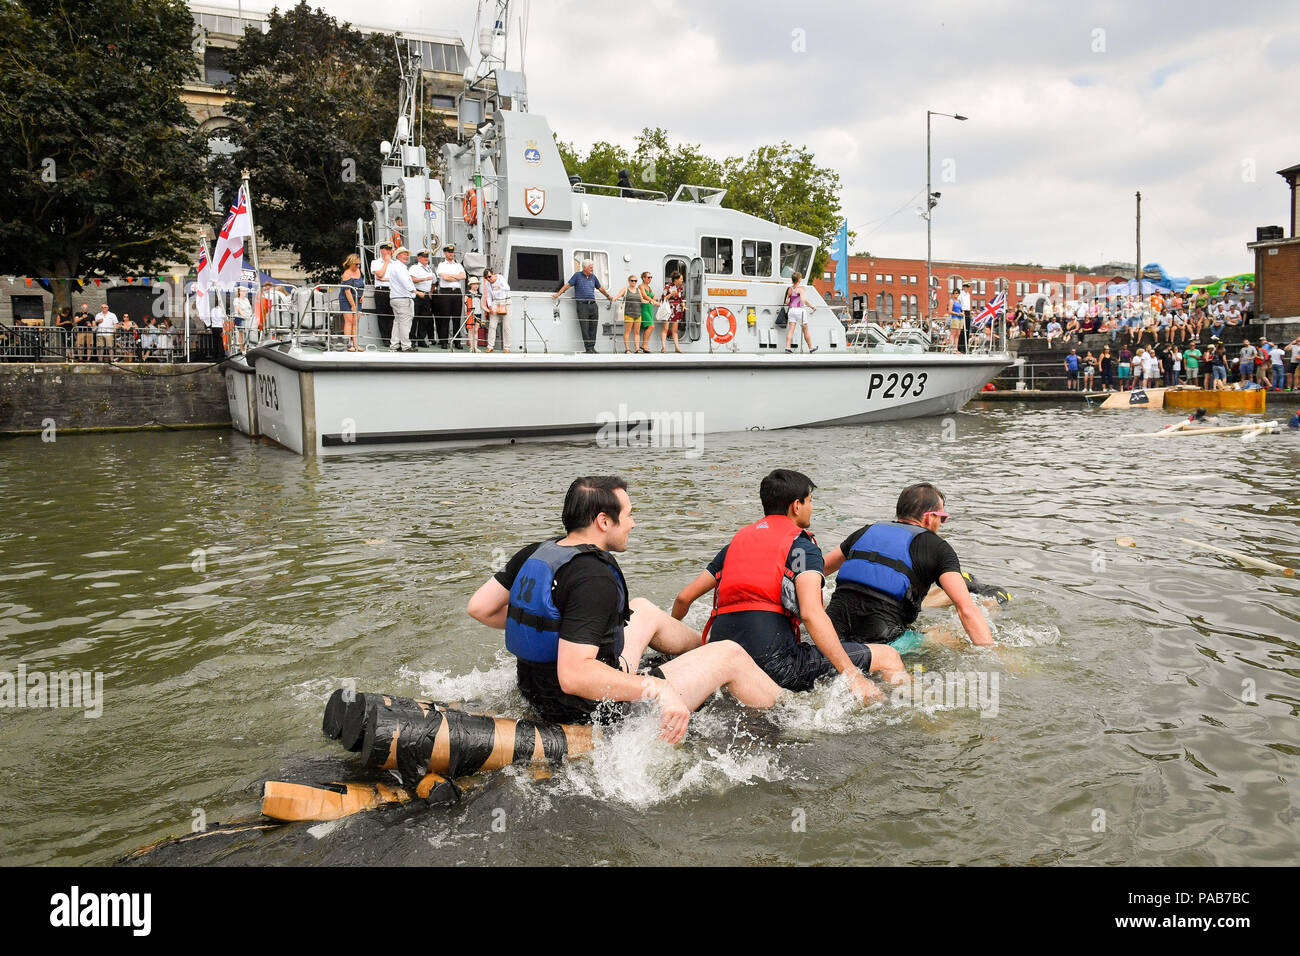 Teams paddle their slowly sinking cardbord boat in a race around Bristol's Floating Harbour, where only floating vessels made from cardboard are allowed, during the Harbour Festival in the city centre during hot sunny weather. Stock Photo